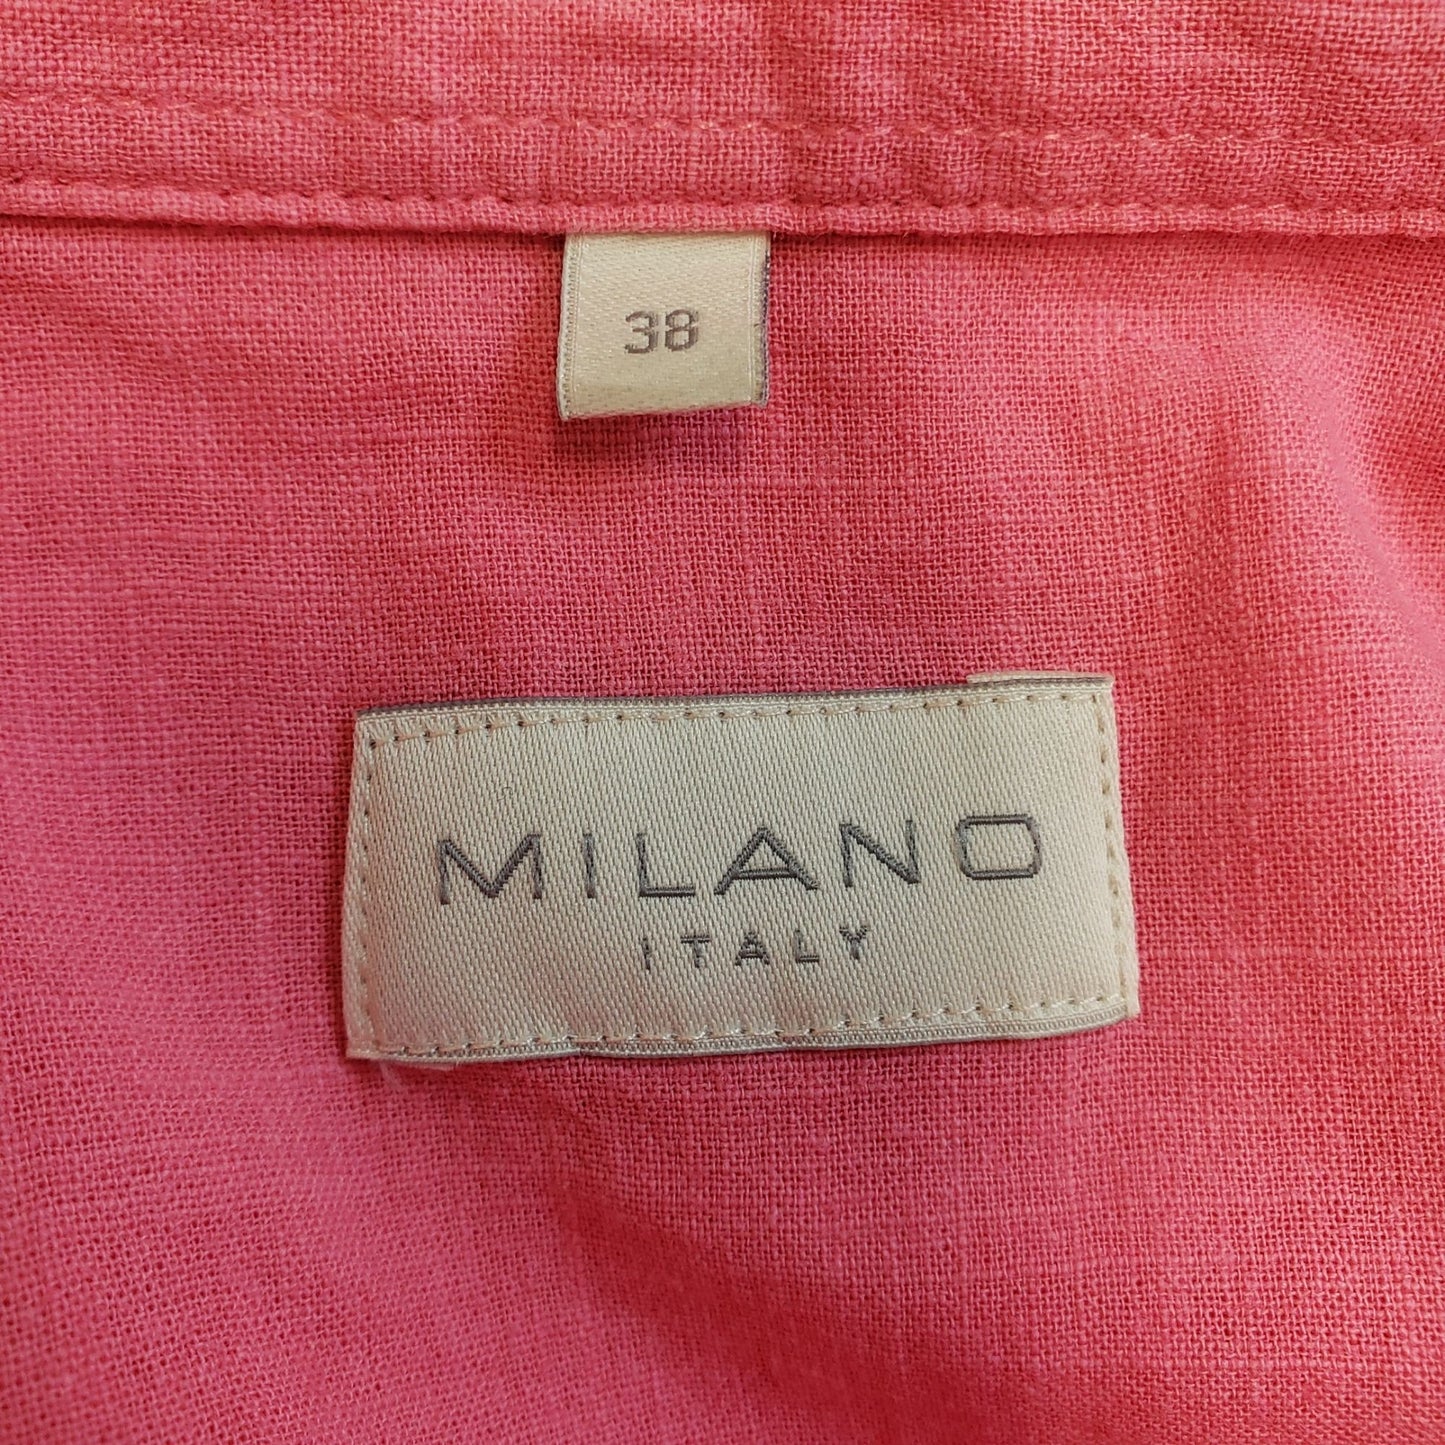 Milano Italy Linen Blend Button Down Shirt Size 38/Small